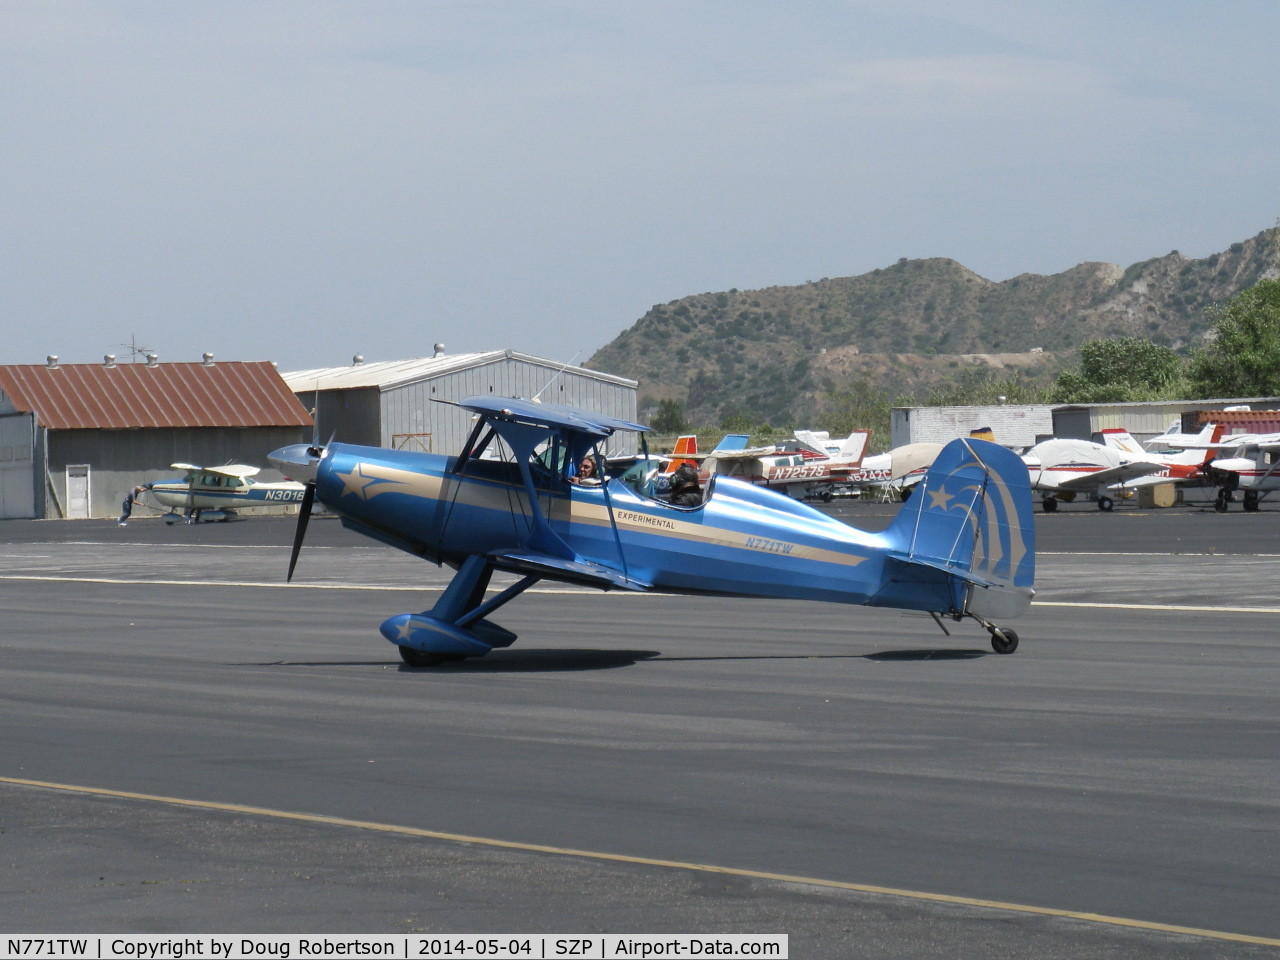 N771TW, 1981 Stolp SA-300 Starduster Too C/N 434, 2005 Poor STOLP SA-300 STARDUSTER TOO, taxi